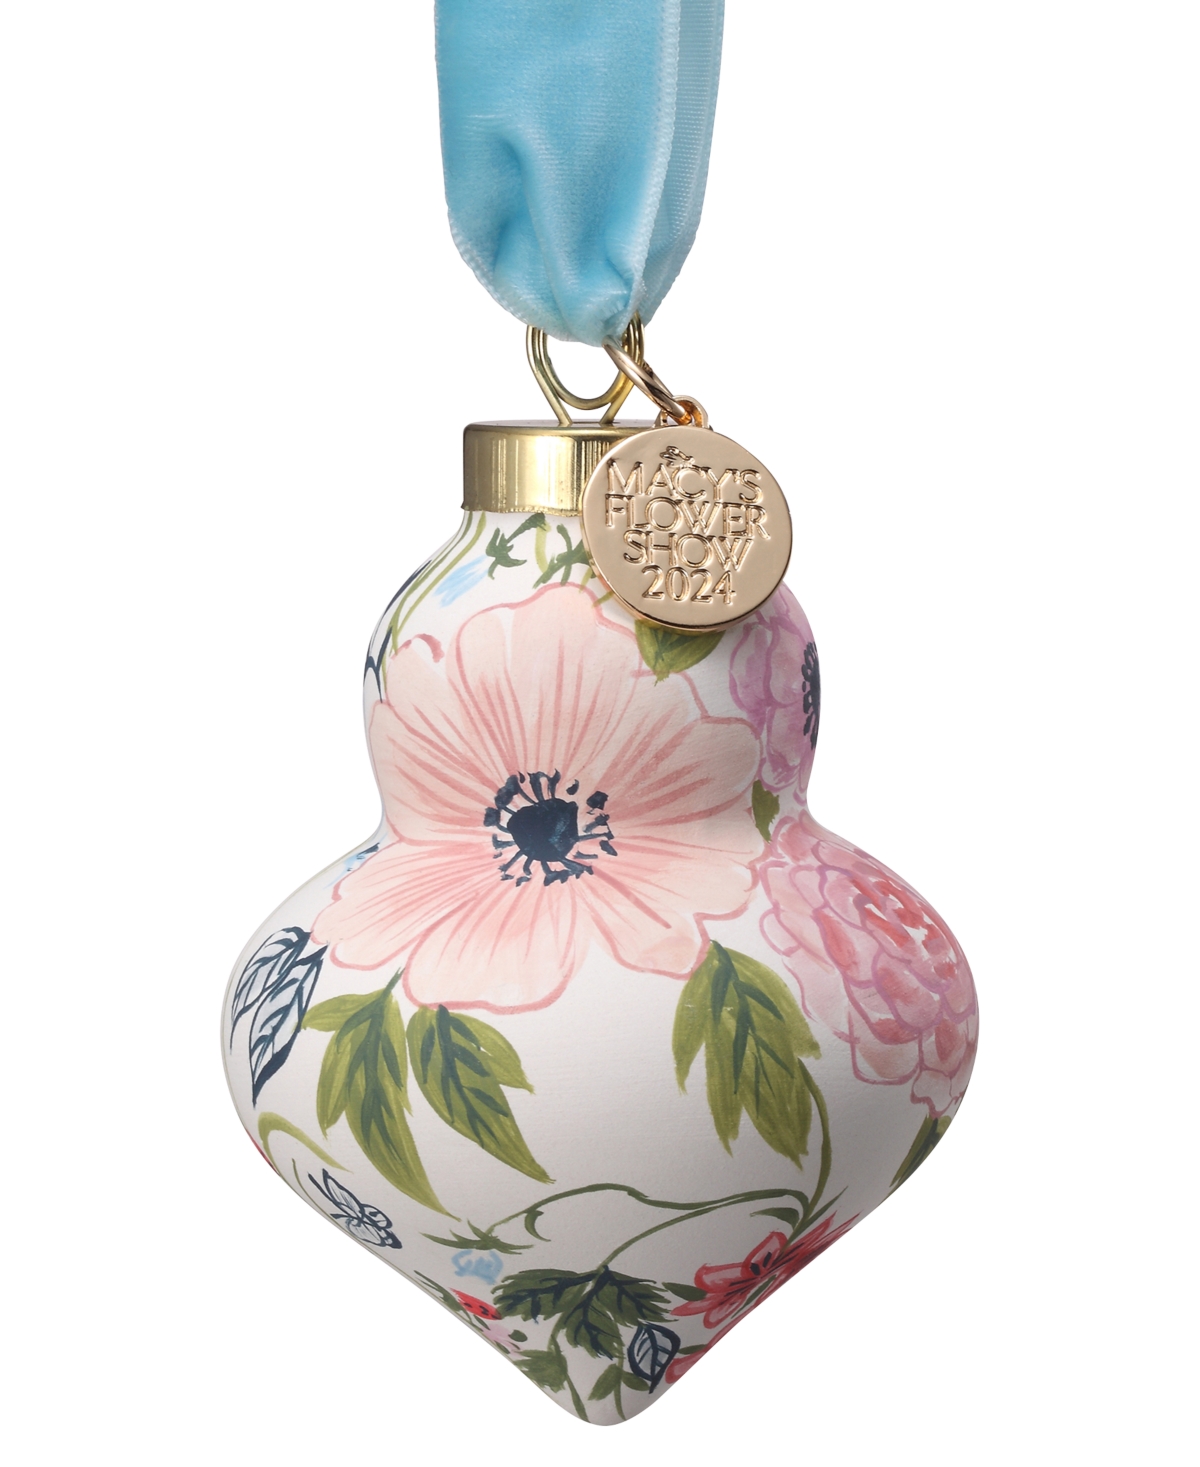 Flower Show Commemorative Ornament, Created for Macy's - Cream Floral Multi